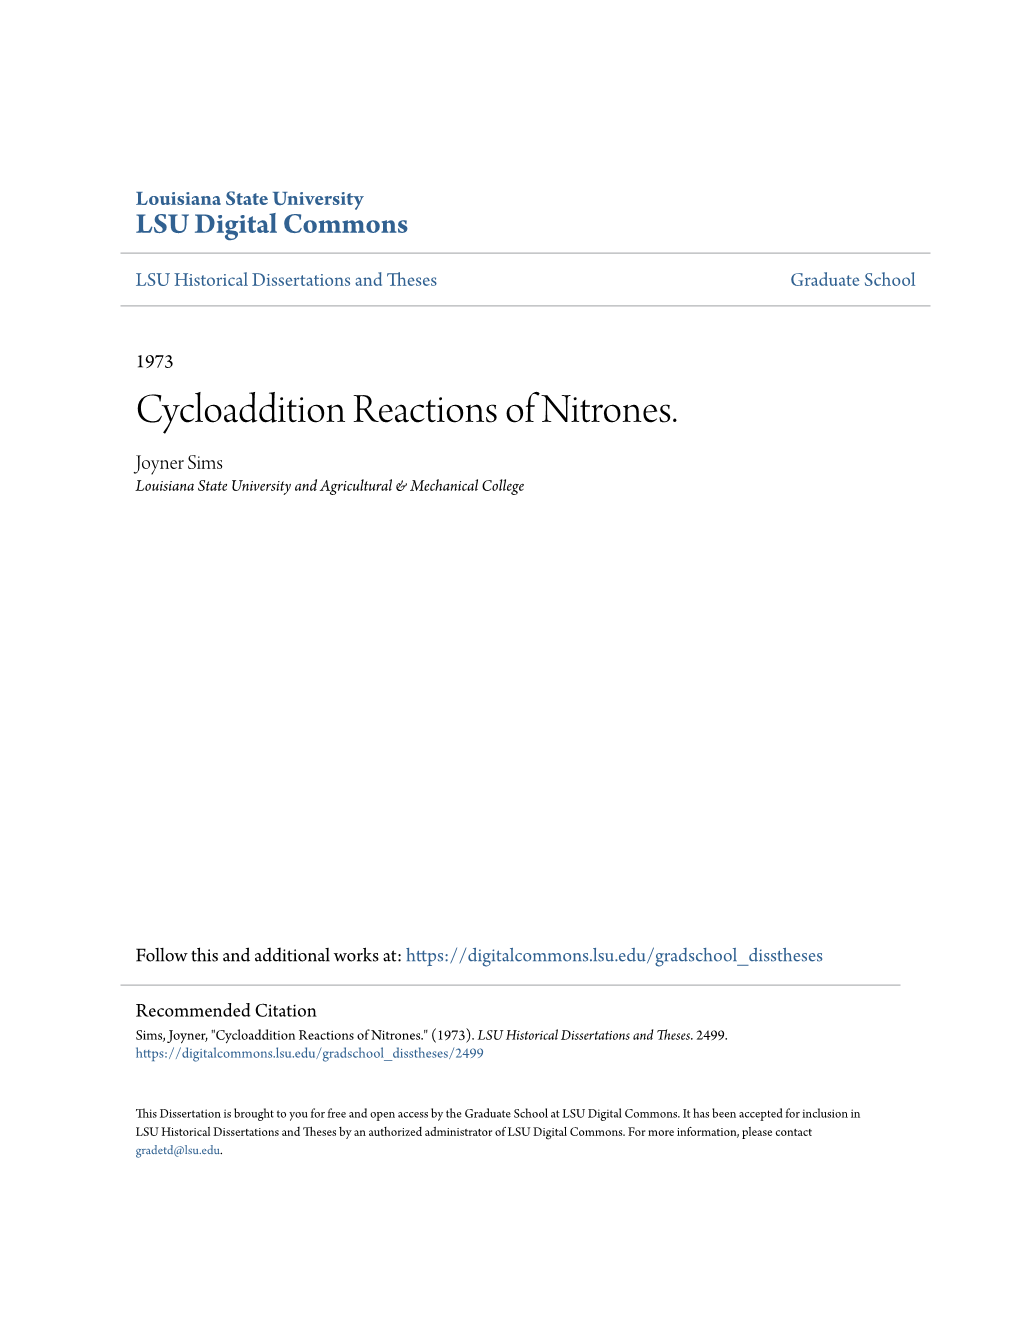 Cycloaddition Reactions of Nitrones. Joyner Sims Louisiana State University and Agricultural & Mechanical College